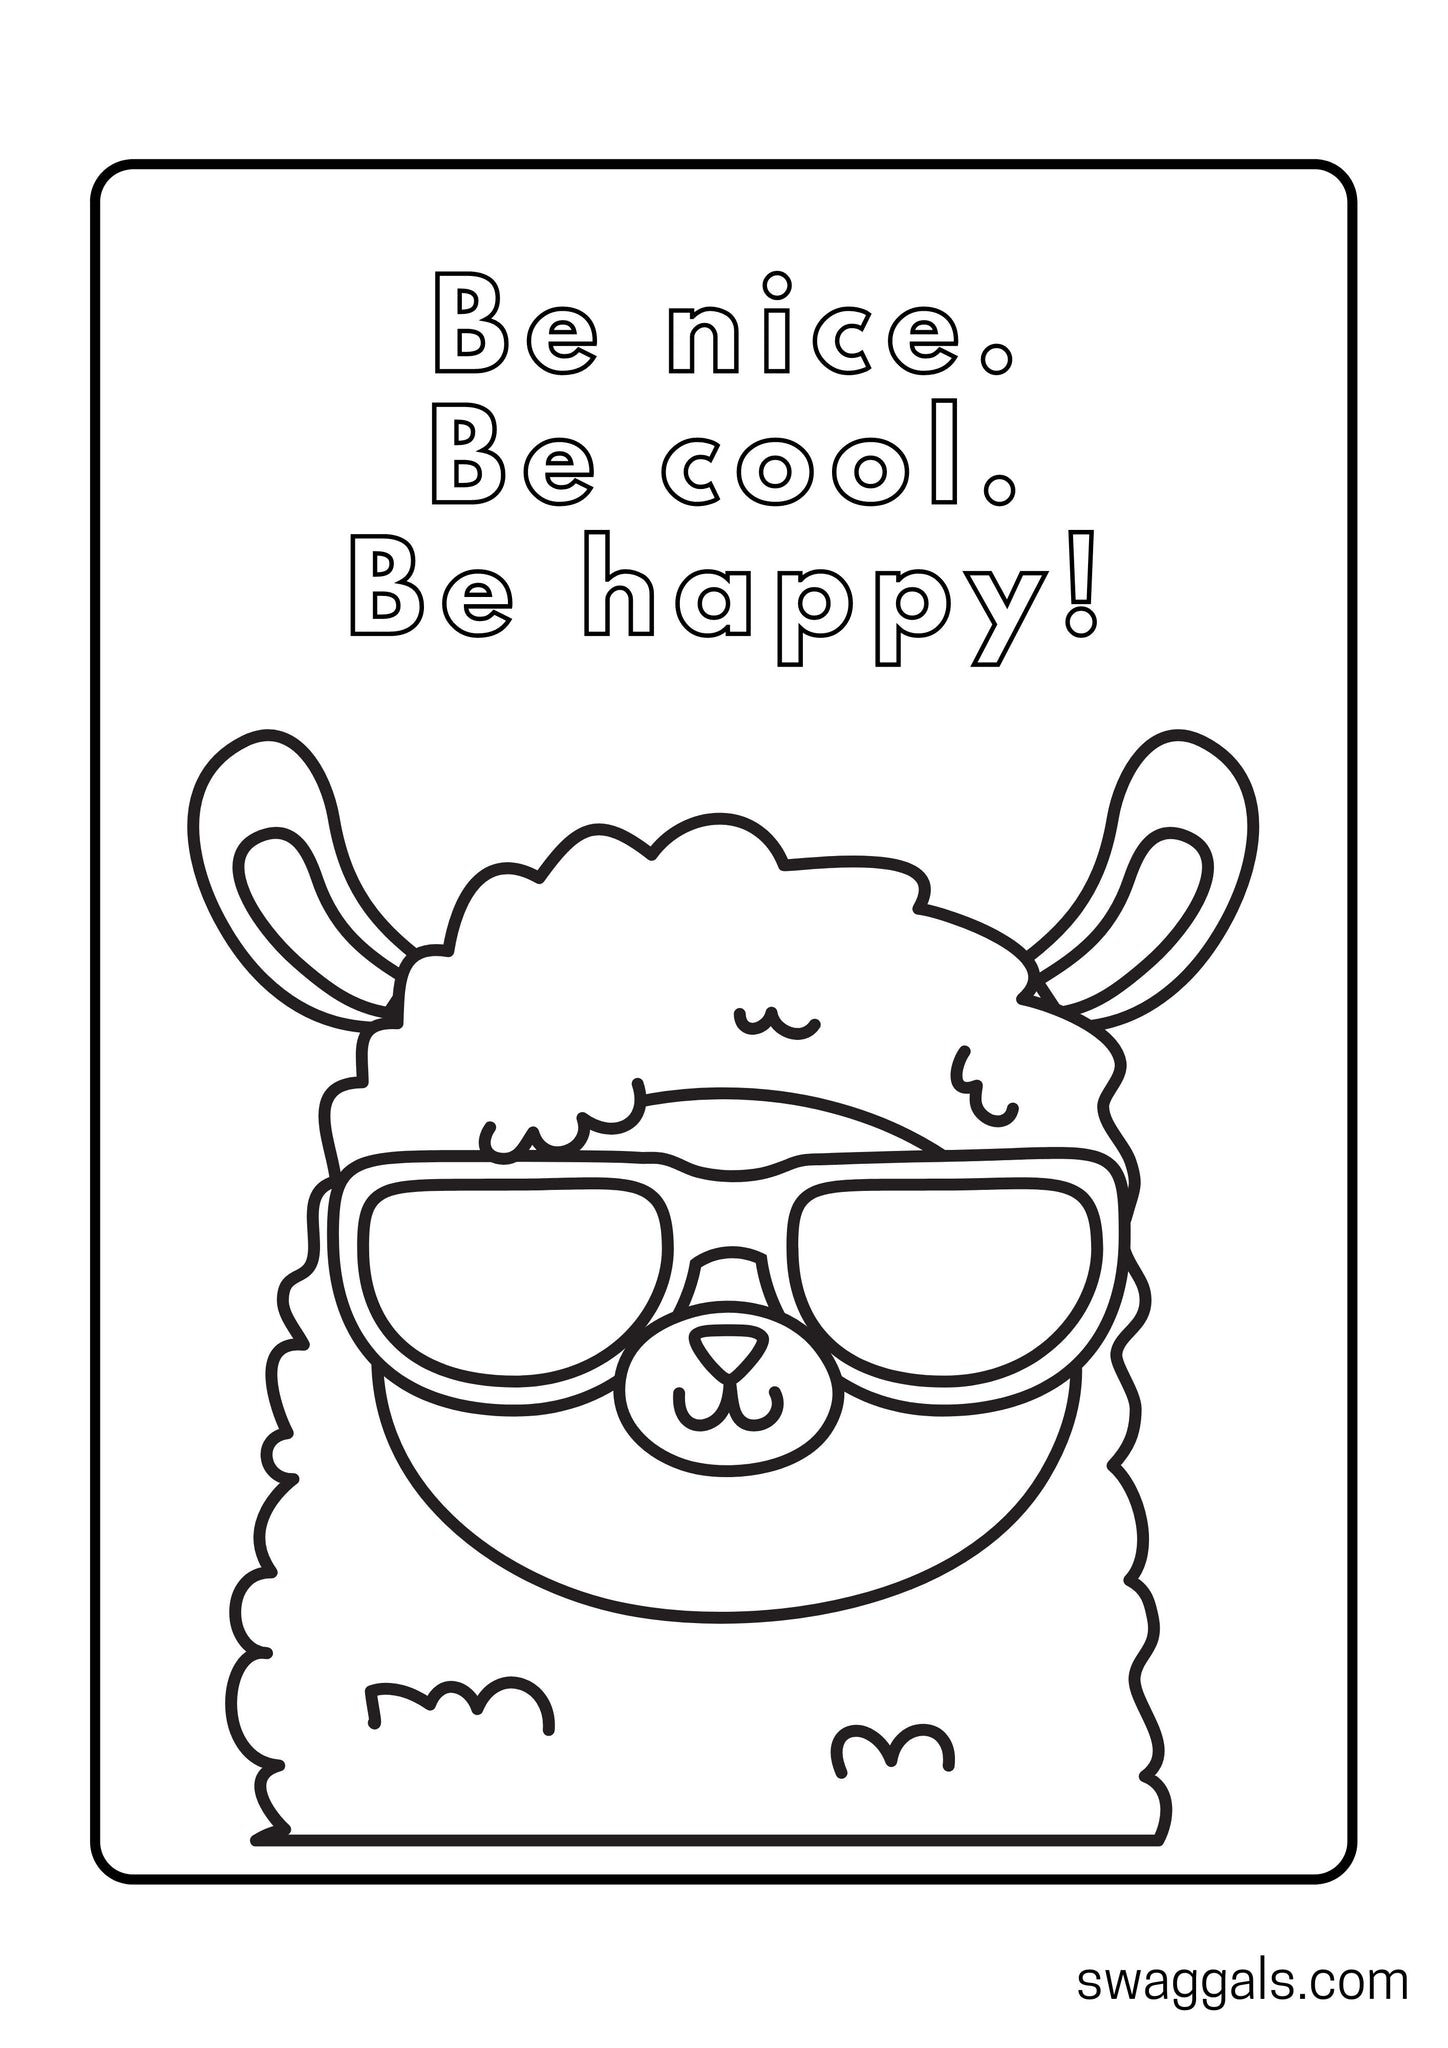 llama coloring pages images